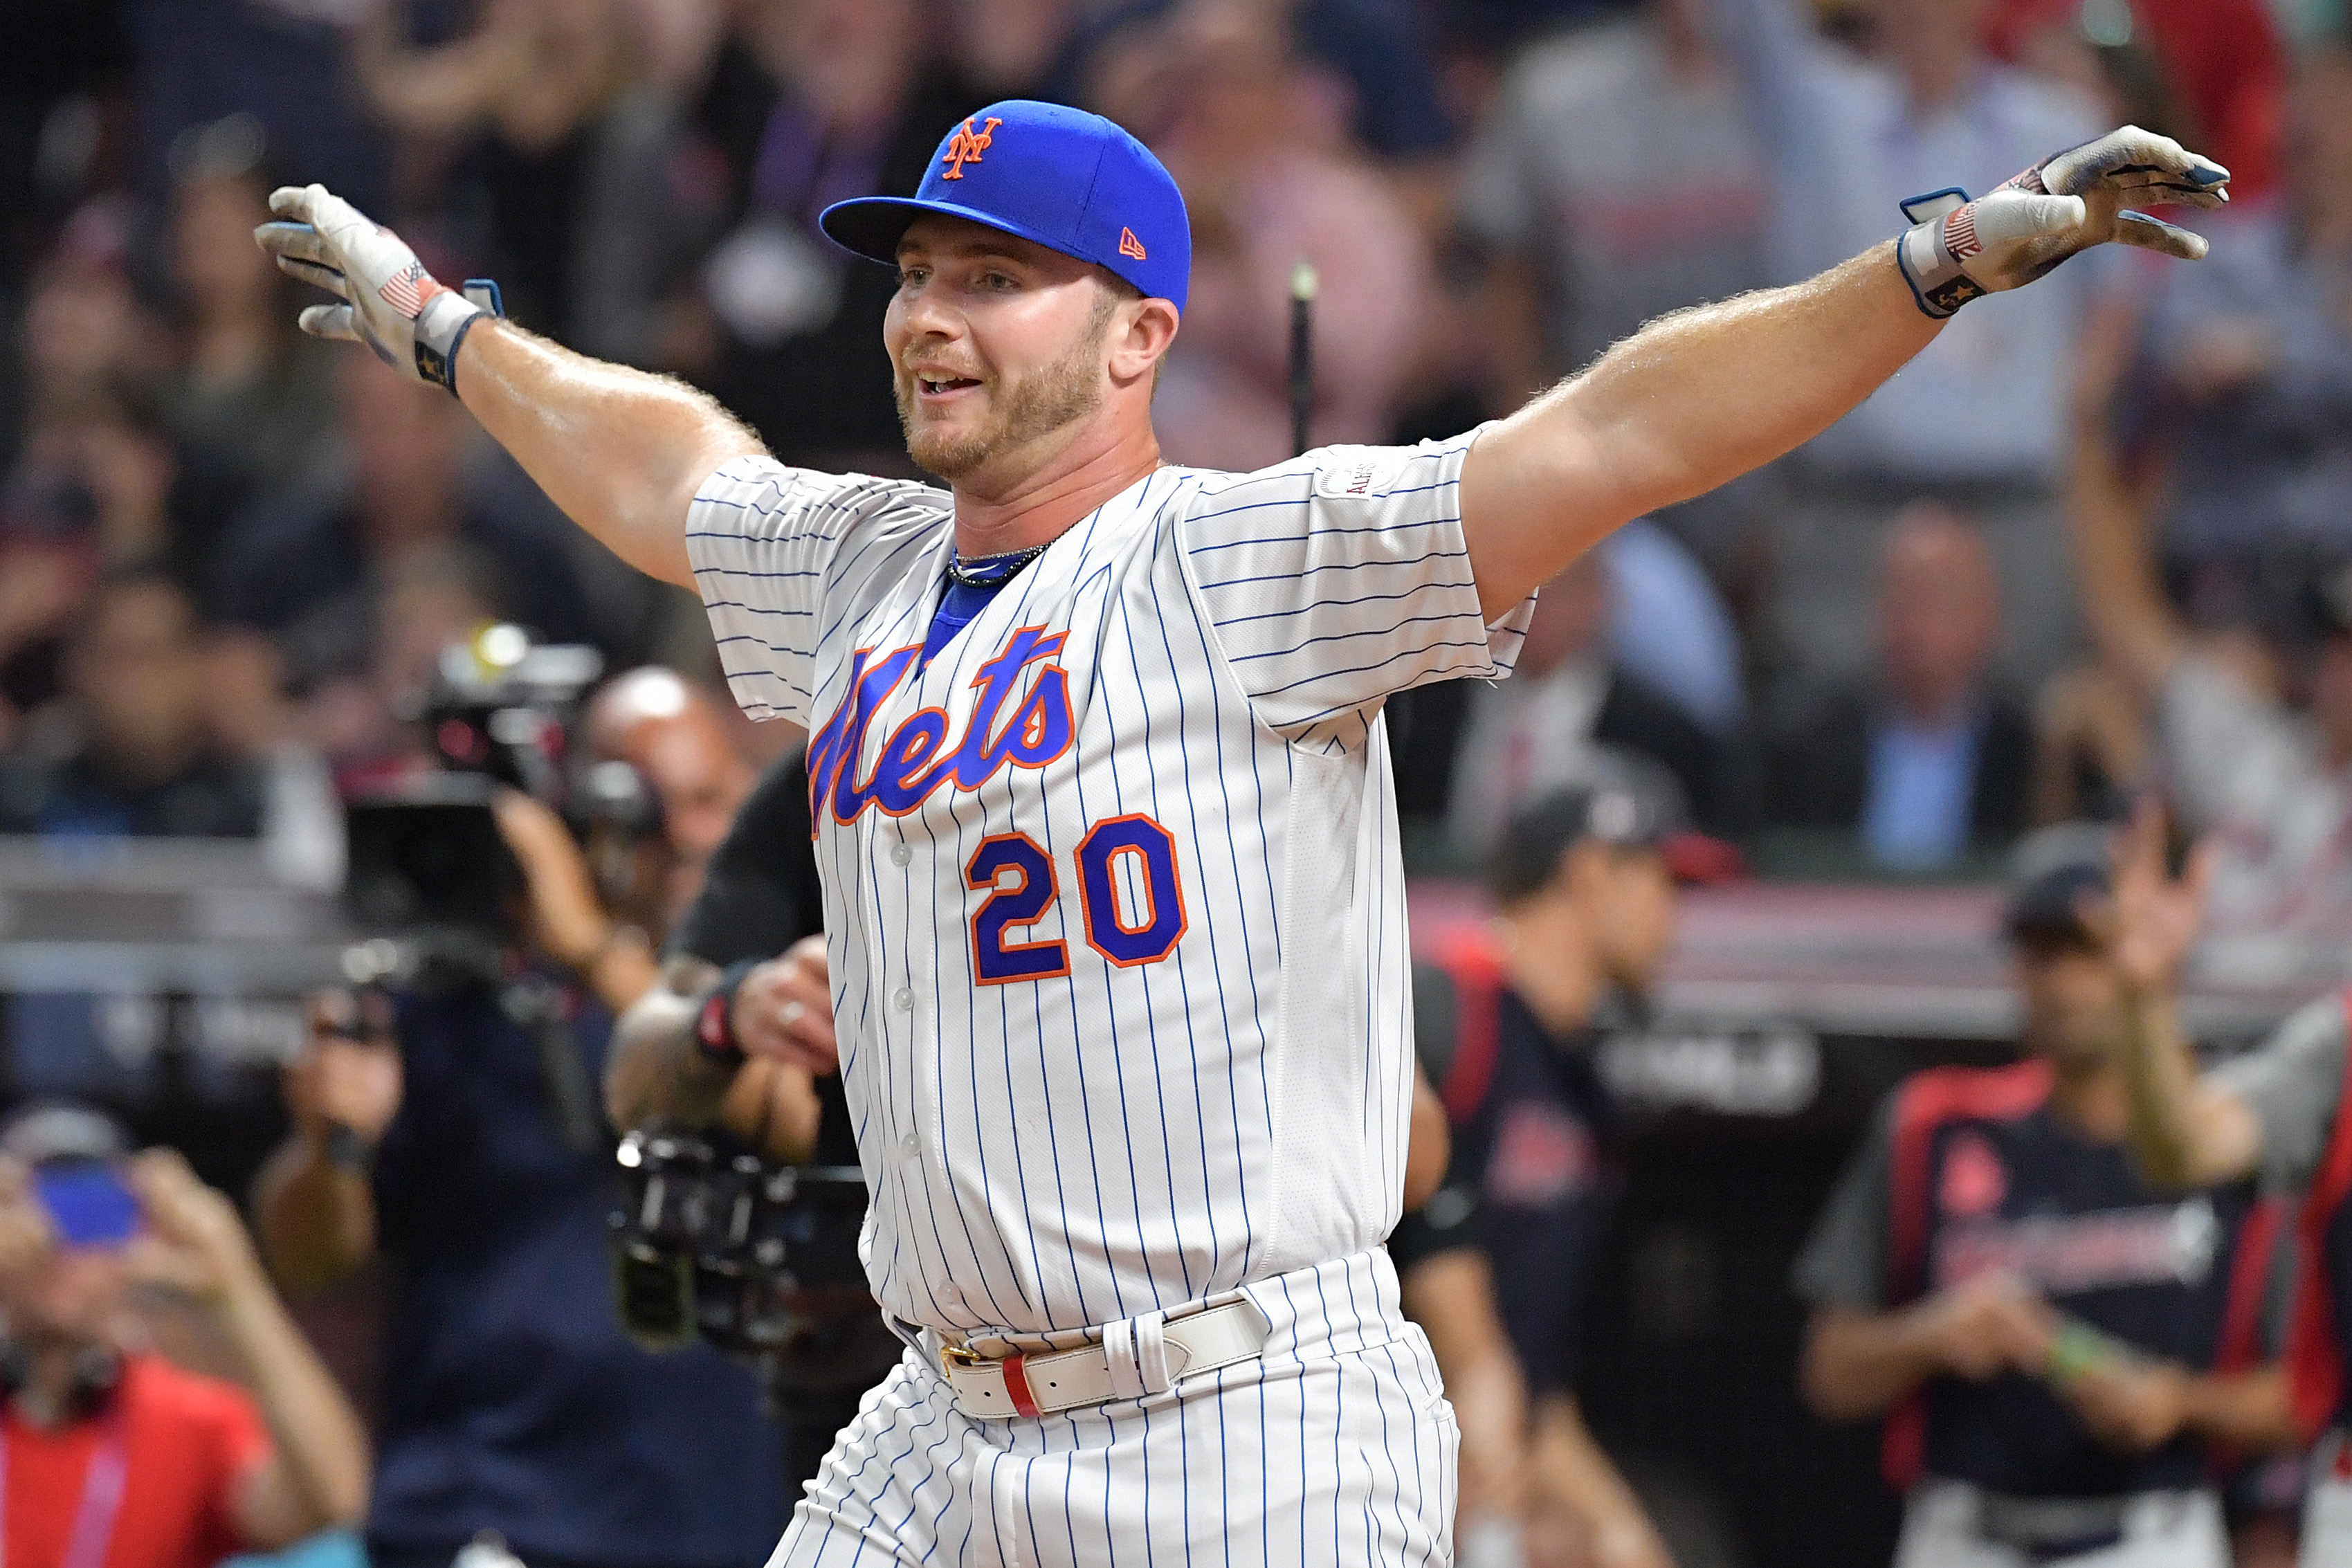 Home Run Derby predictions 2022: Pete Alonso is favorite for a 3-peat